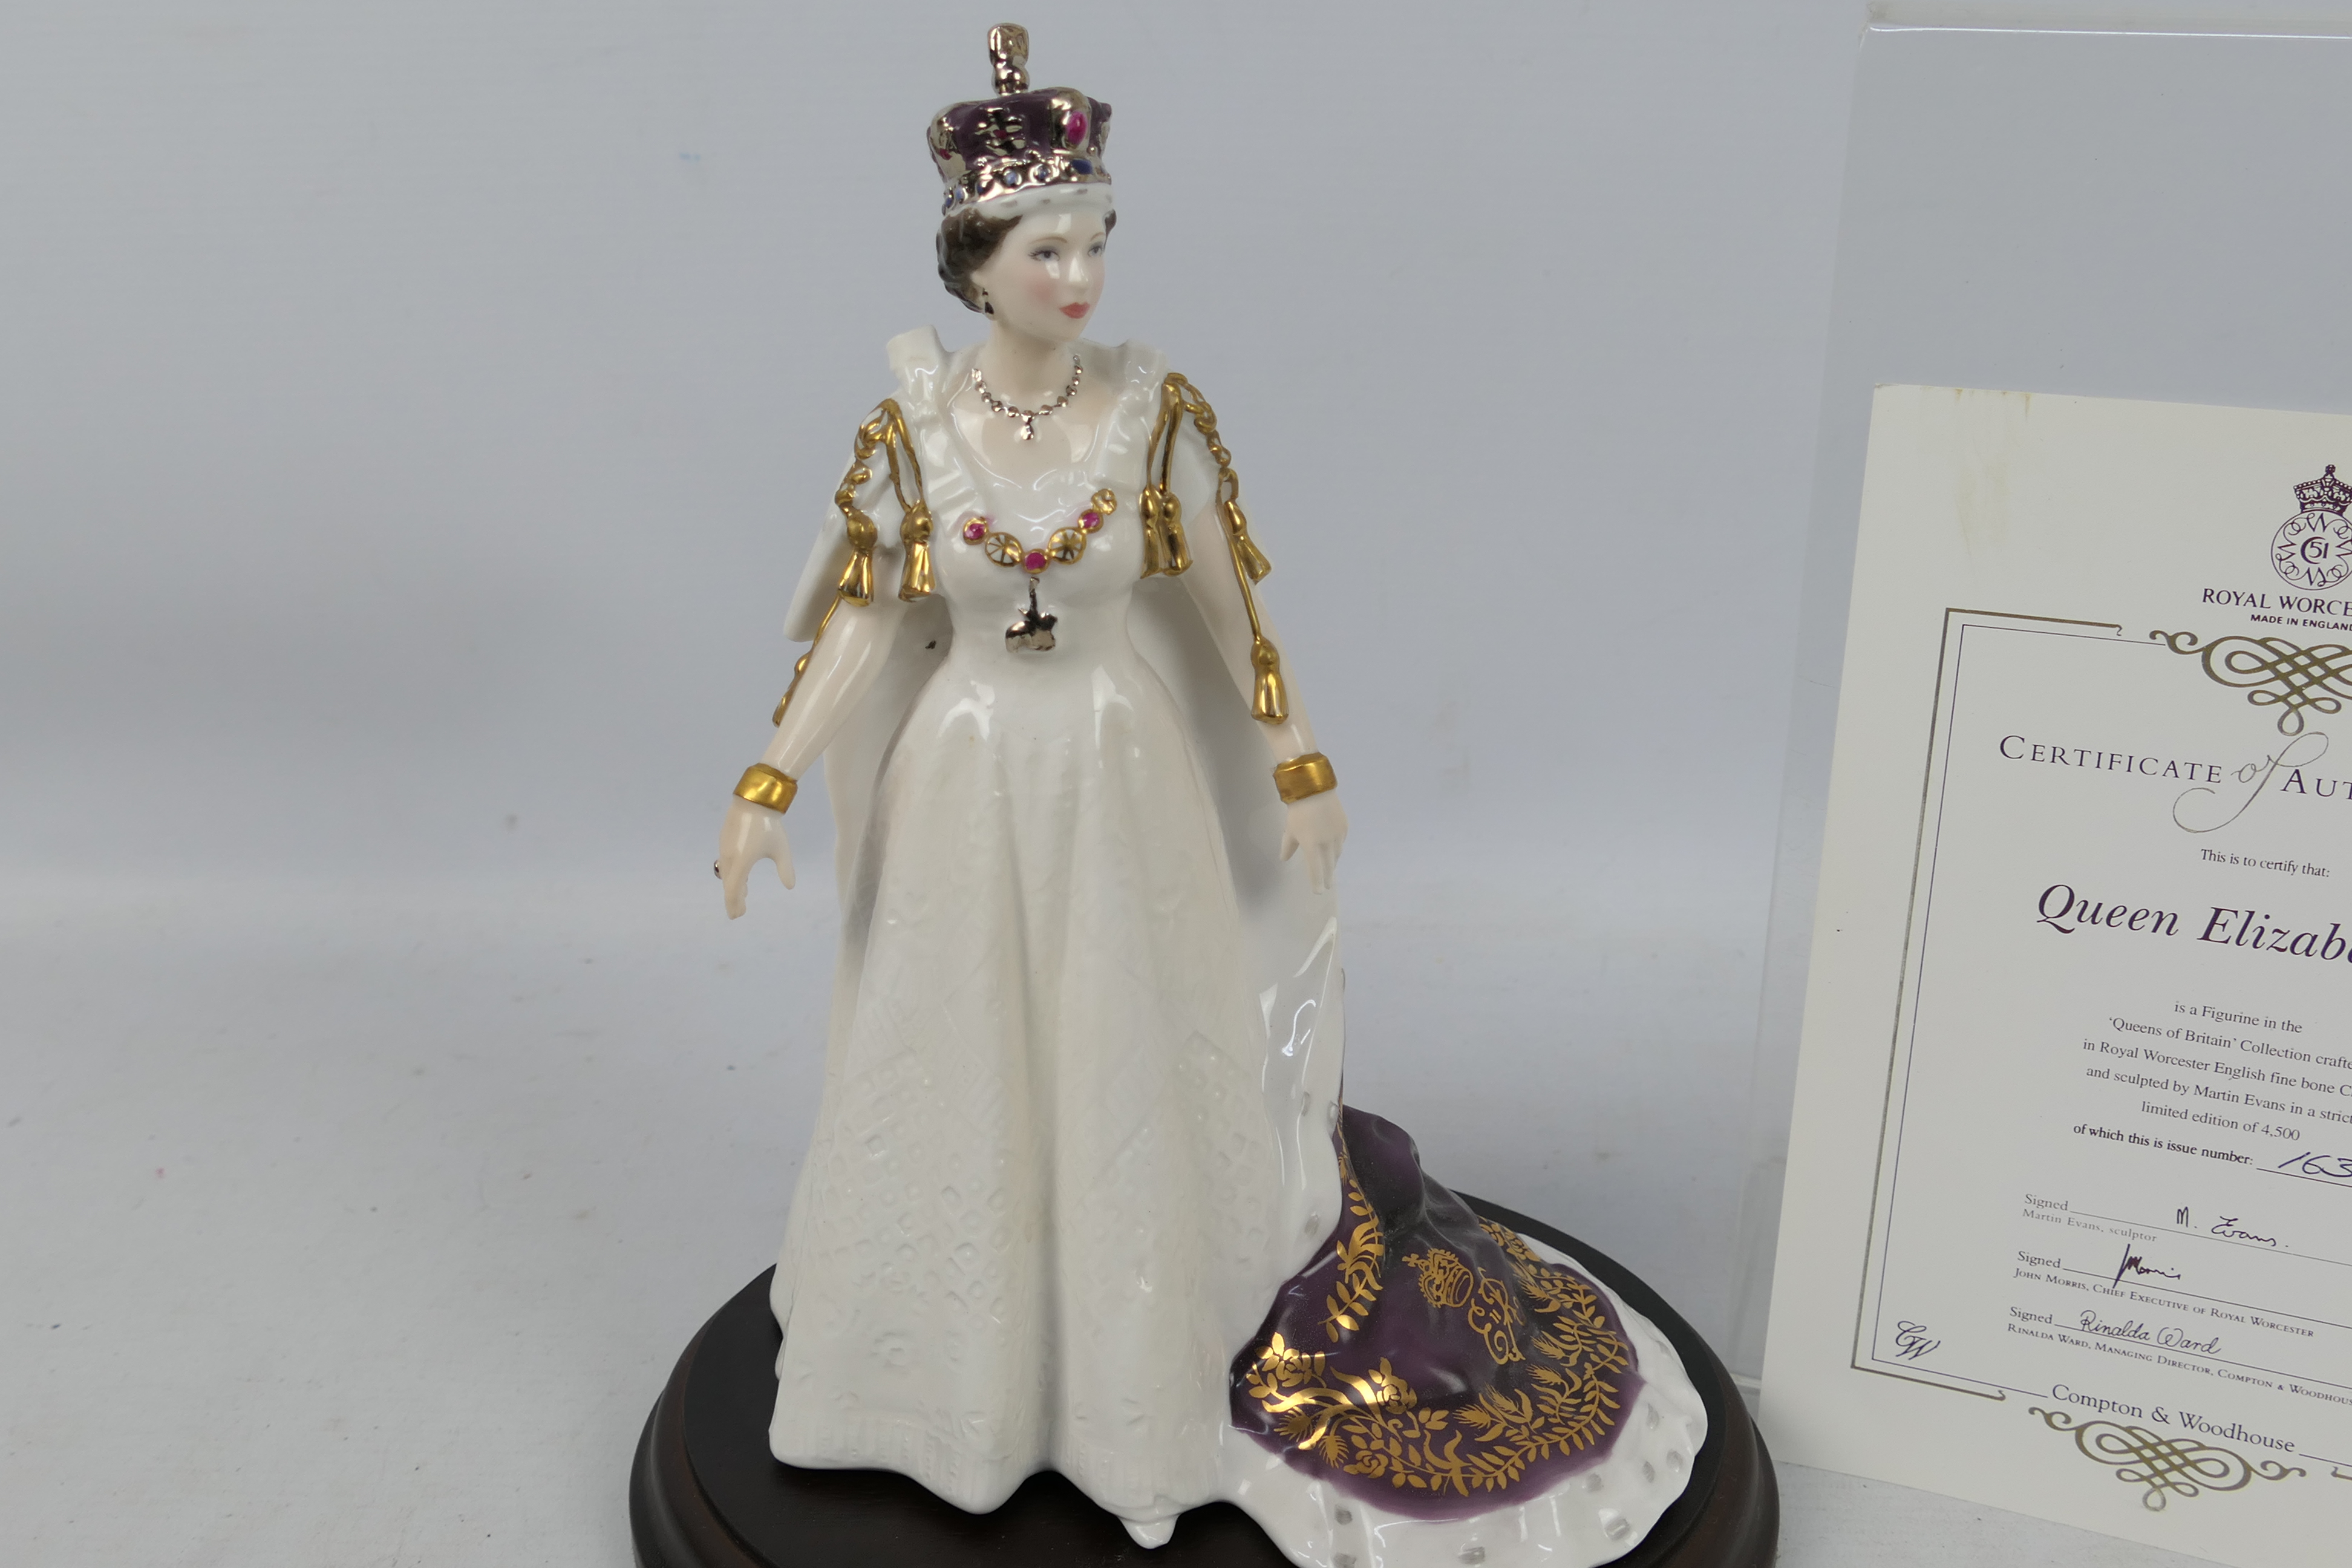 Royal Worcester - A limited edition figure for Compton & Woodhouse depicting Queen Elizabeth II', - Image 2 of 5